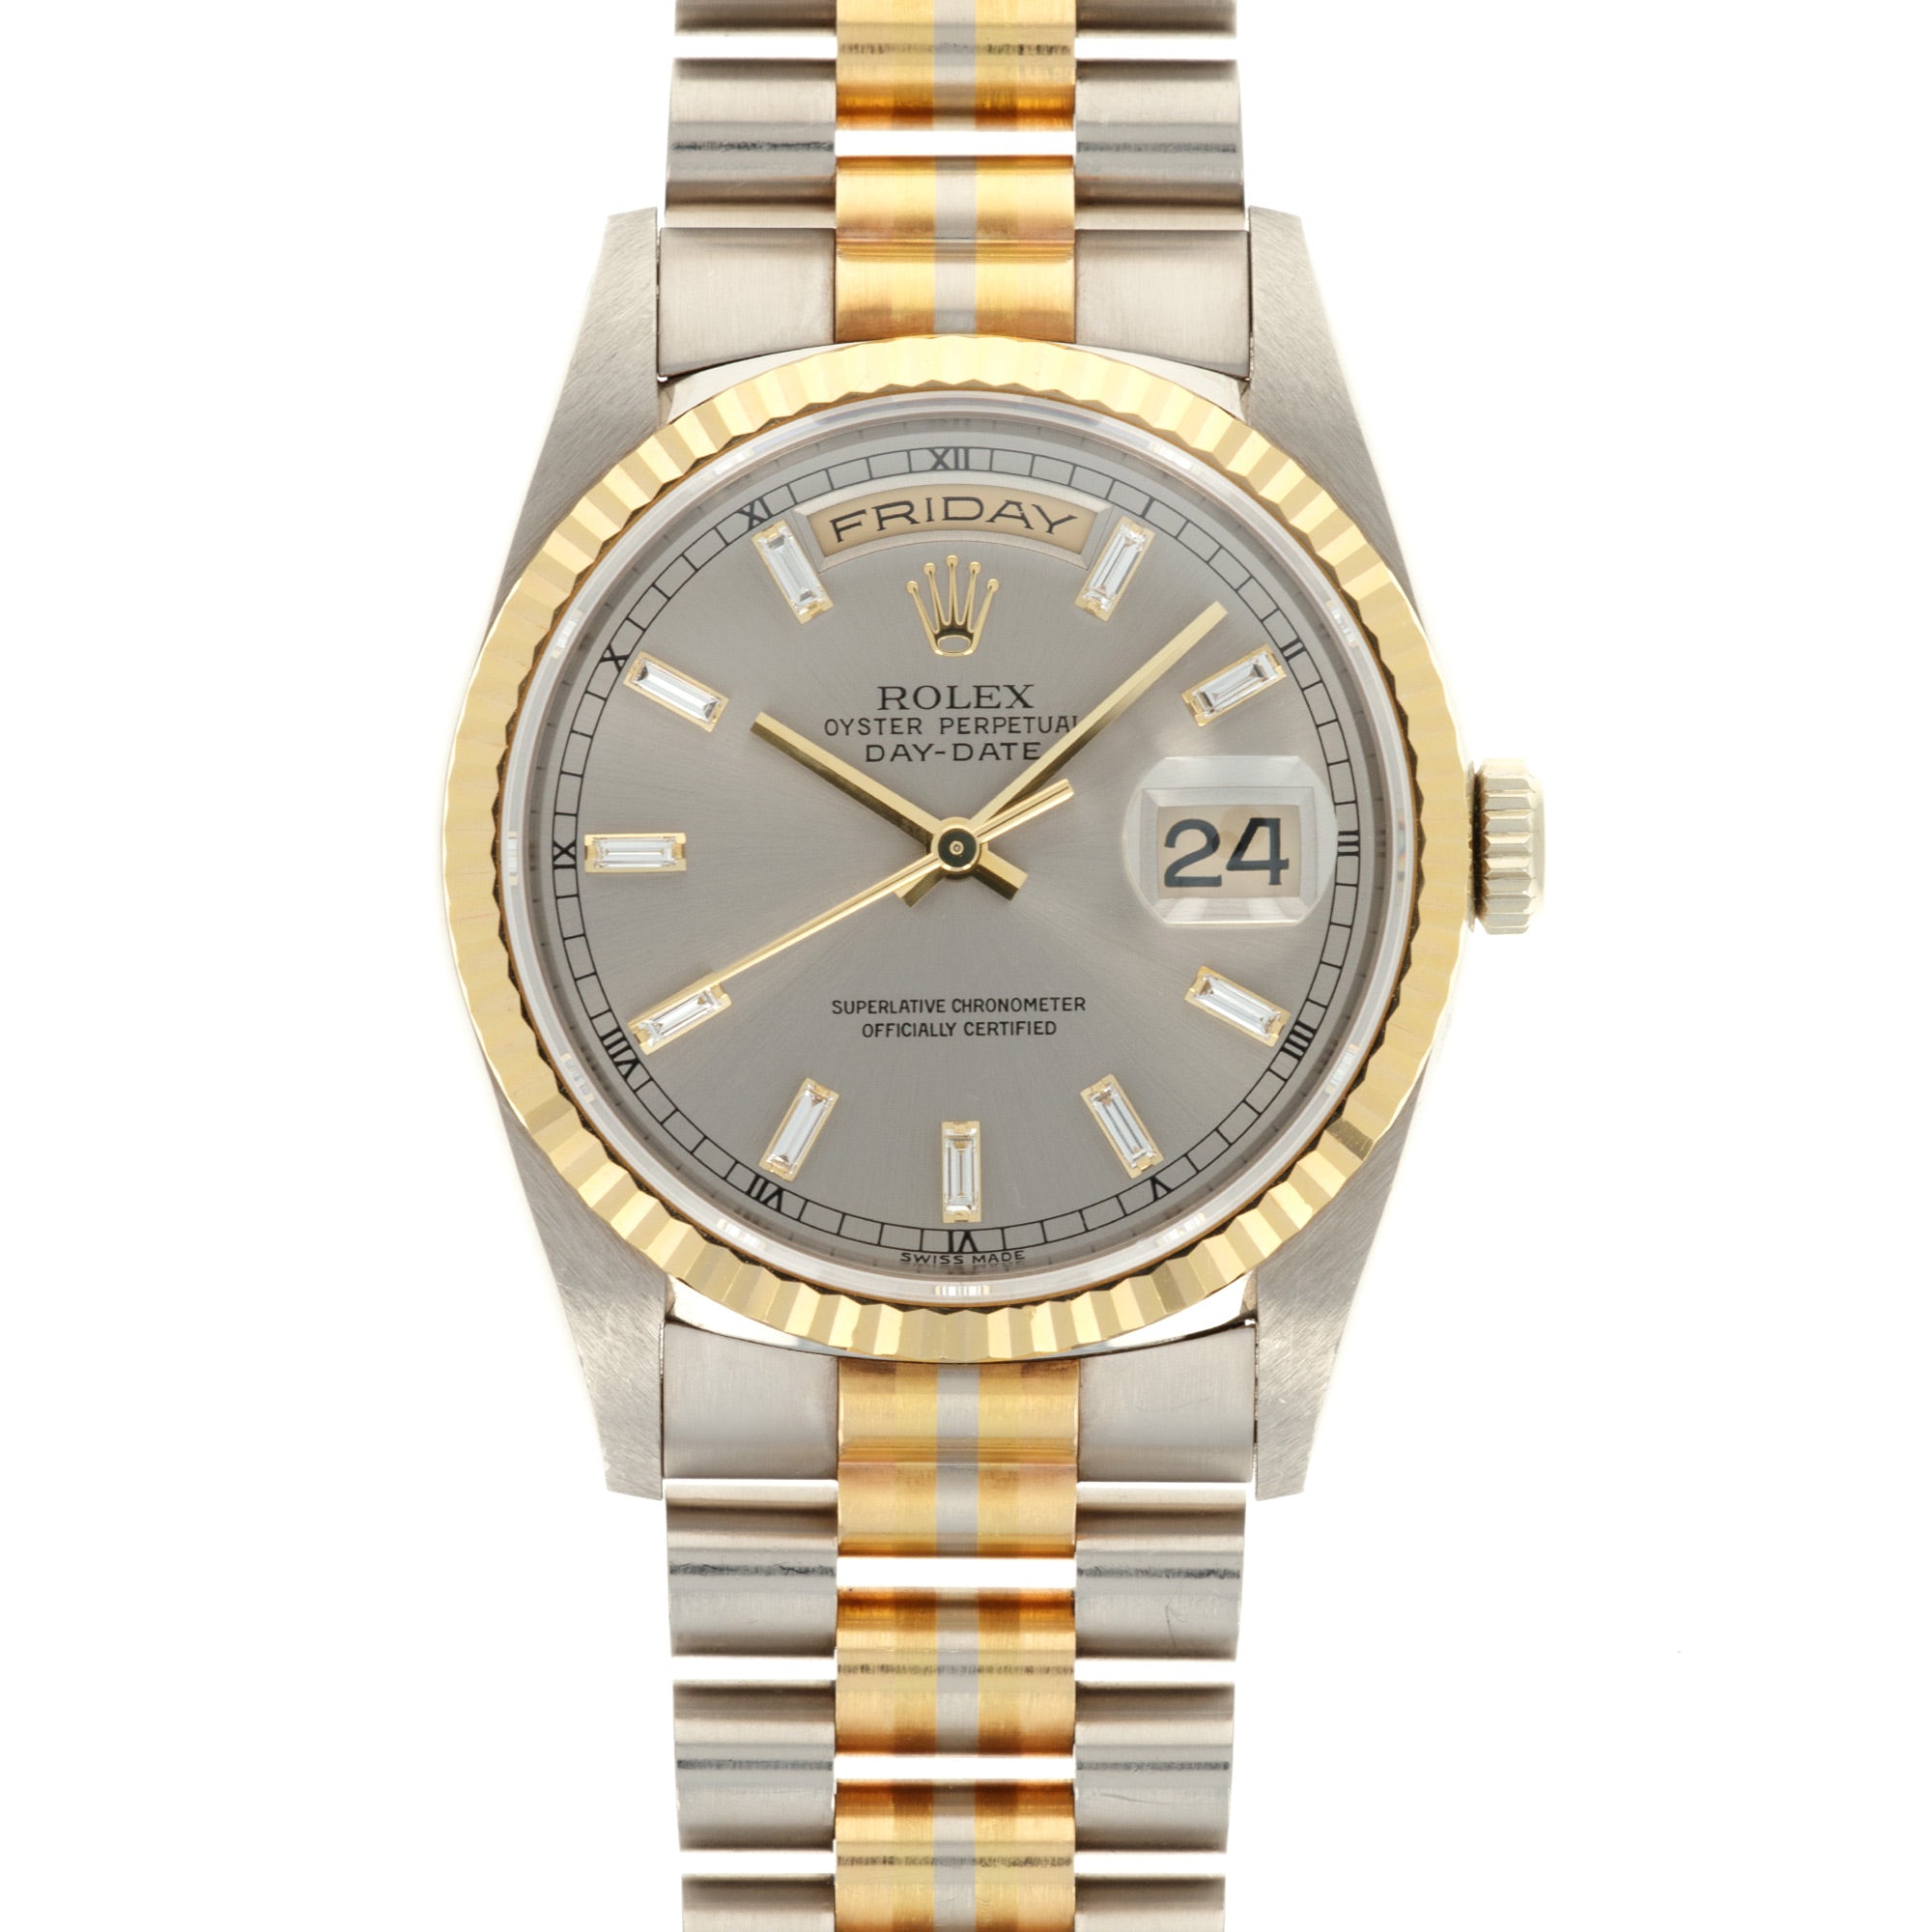 Rolex - Rolex Tridor Day-Date Ref. 18239 with Baguette Diamond Dial - The Keystone Watches